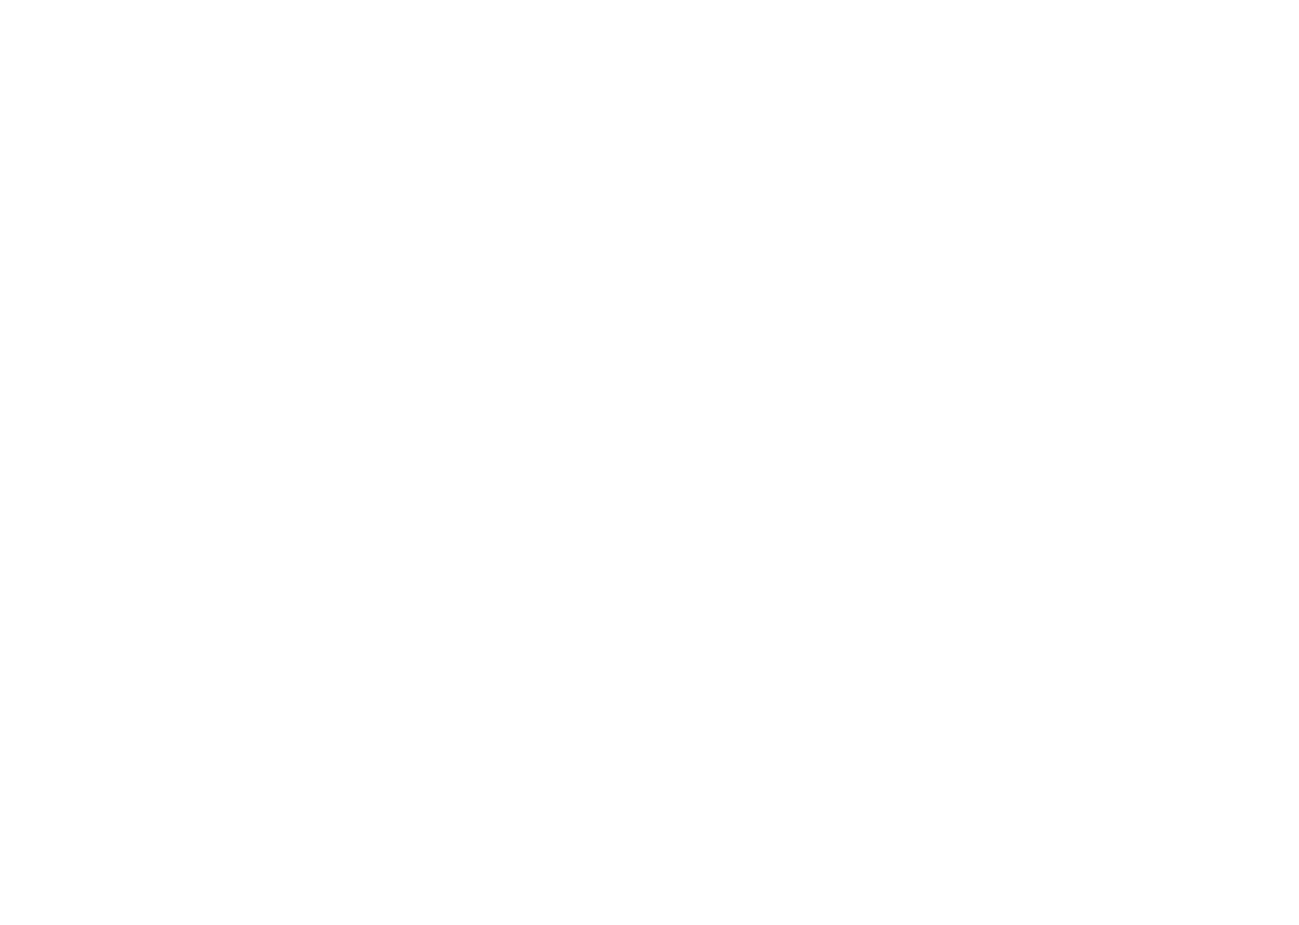 The school is placing a greater focus on healthy eating and wellbeing with kindergarten and year 1 and 2 students, an...